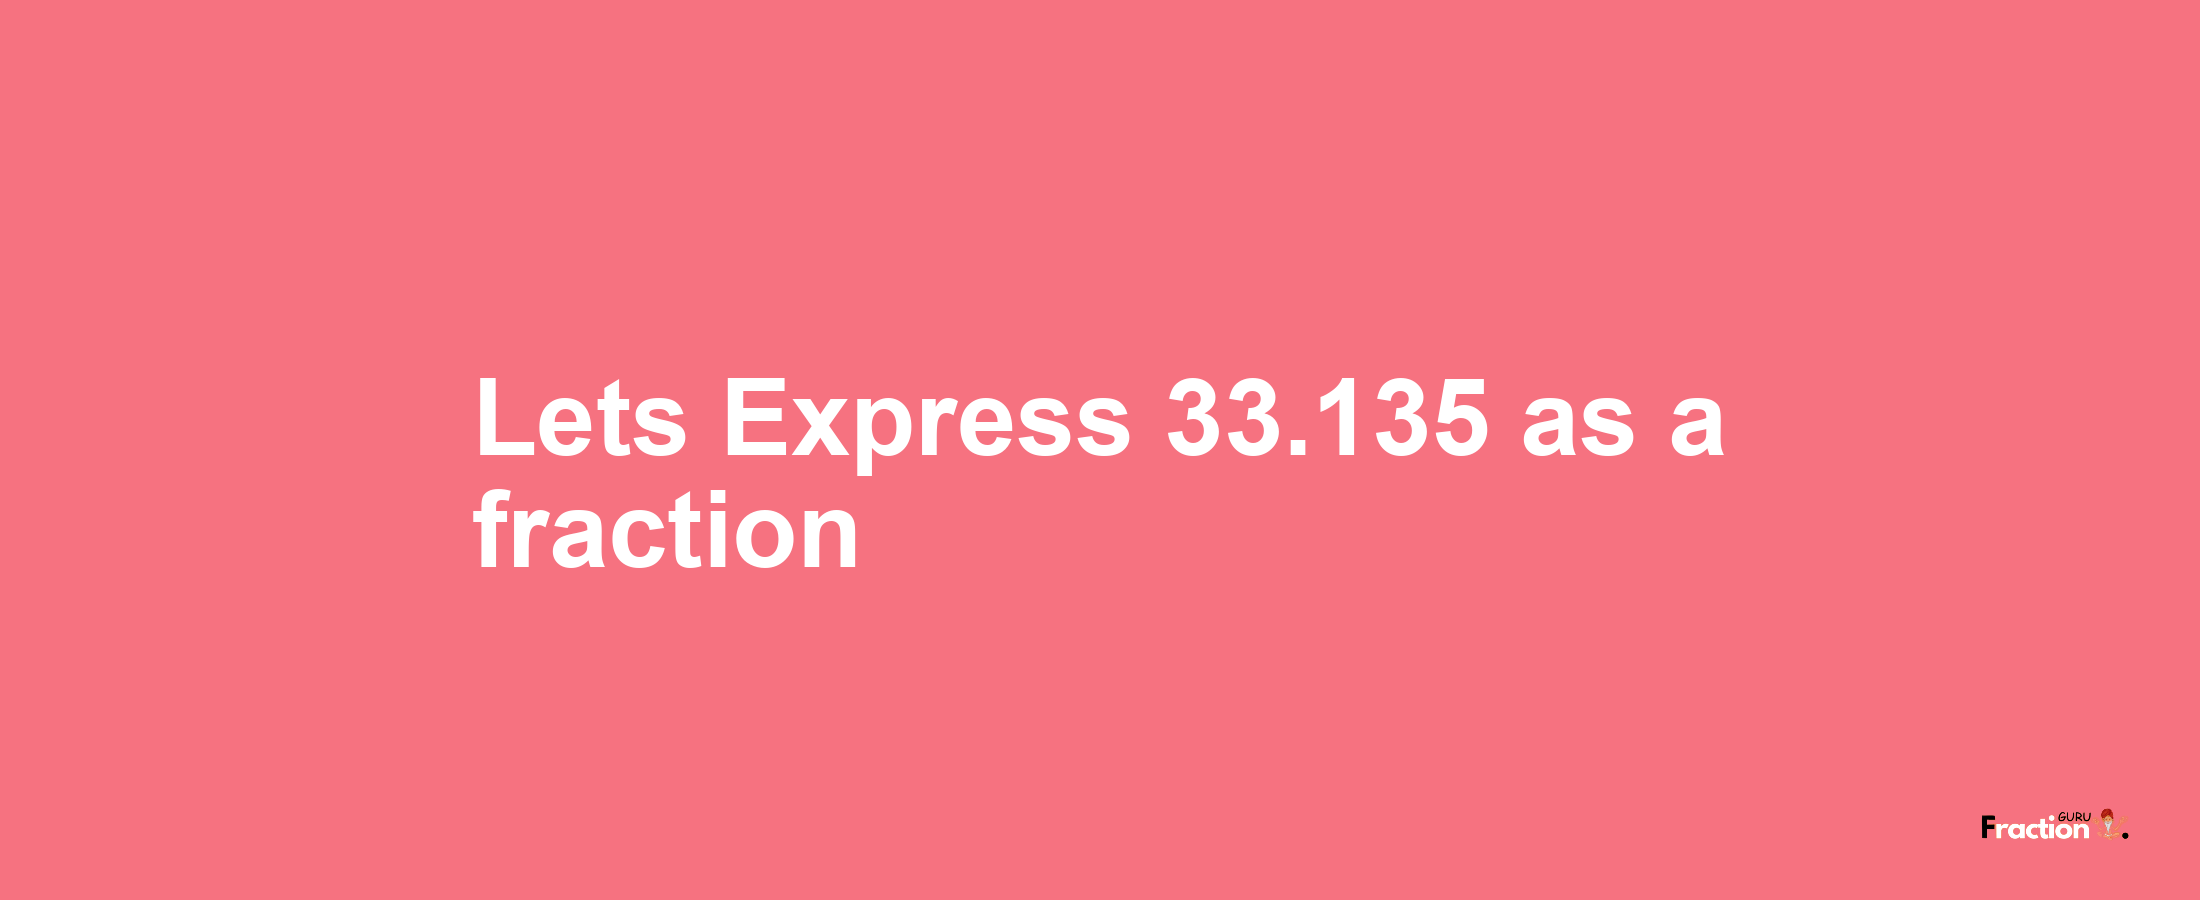 Lets Express 33.135 as afraction